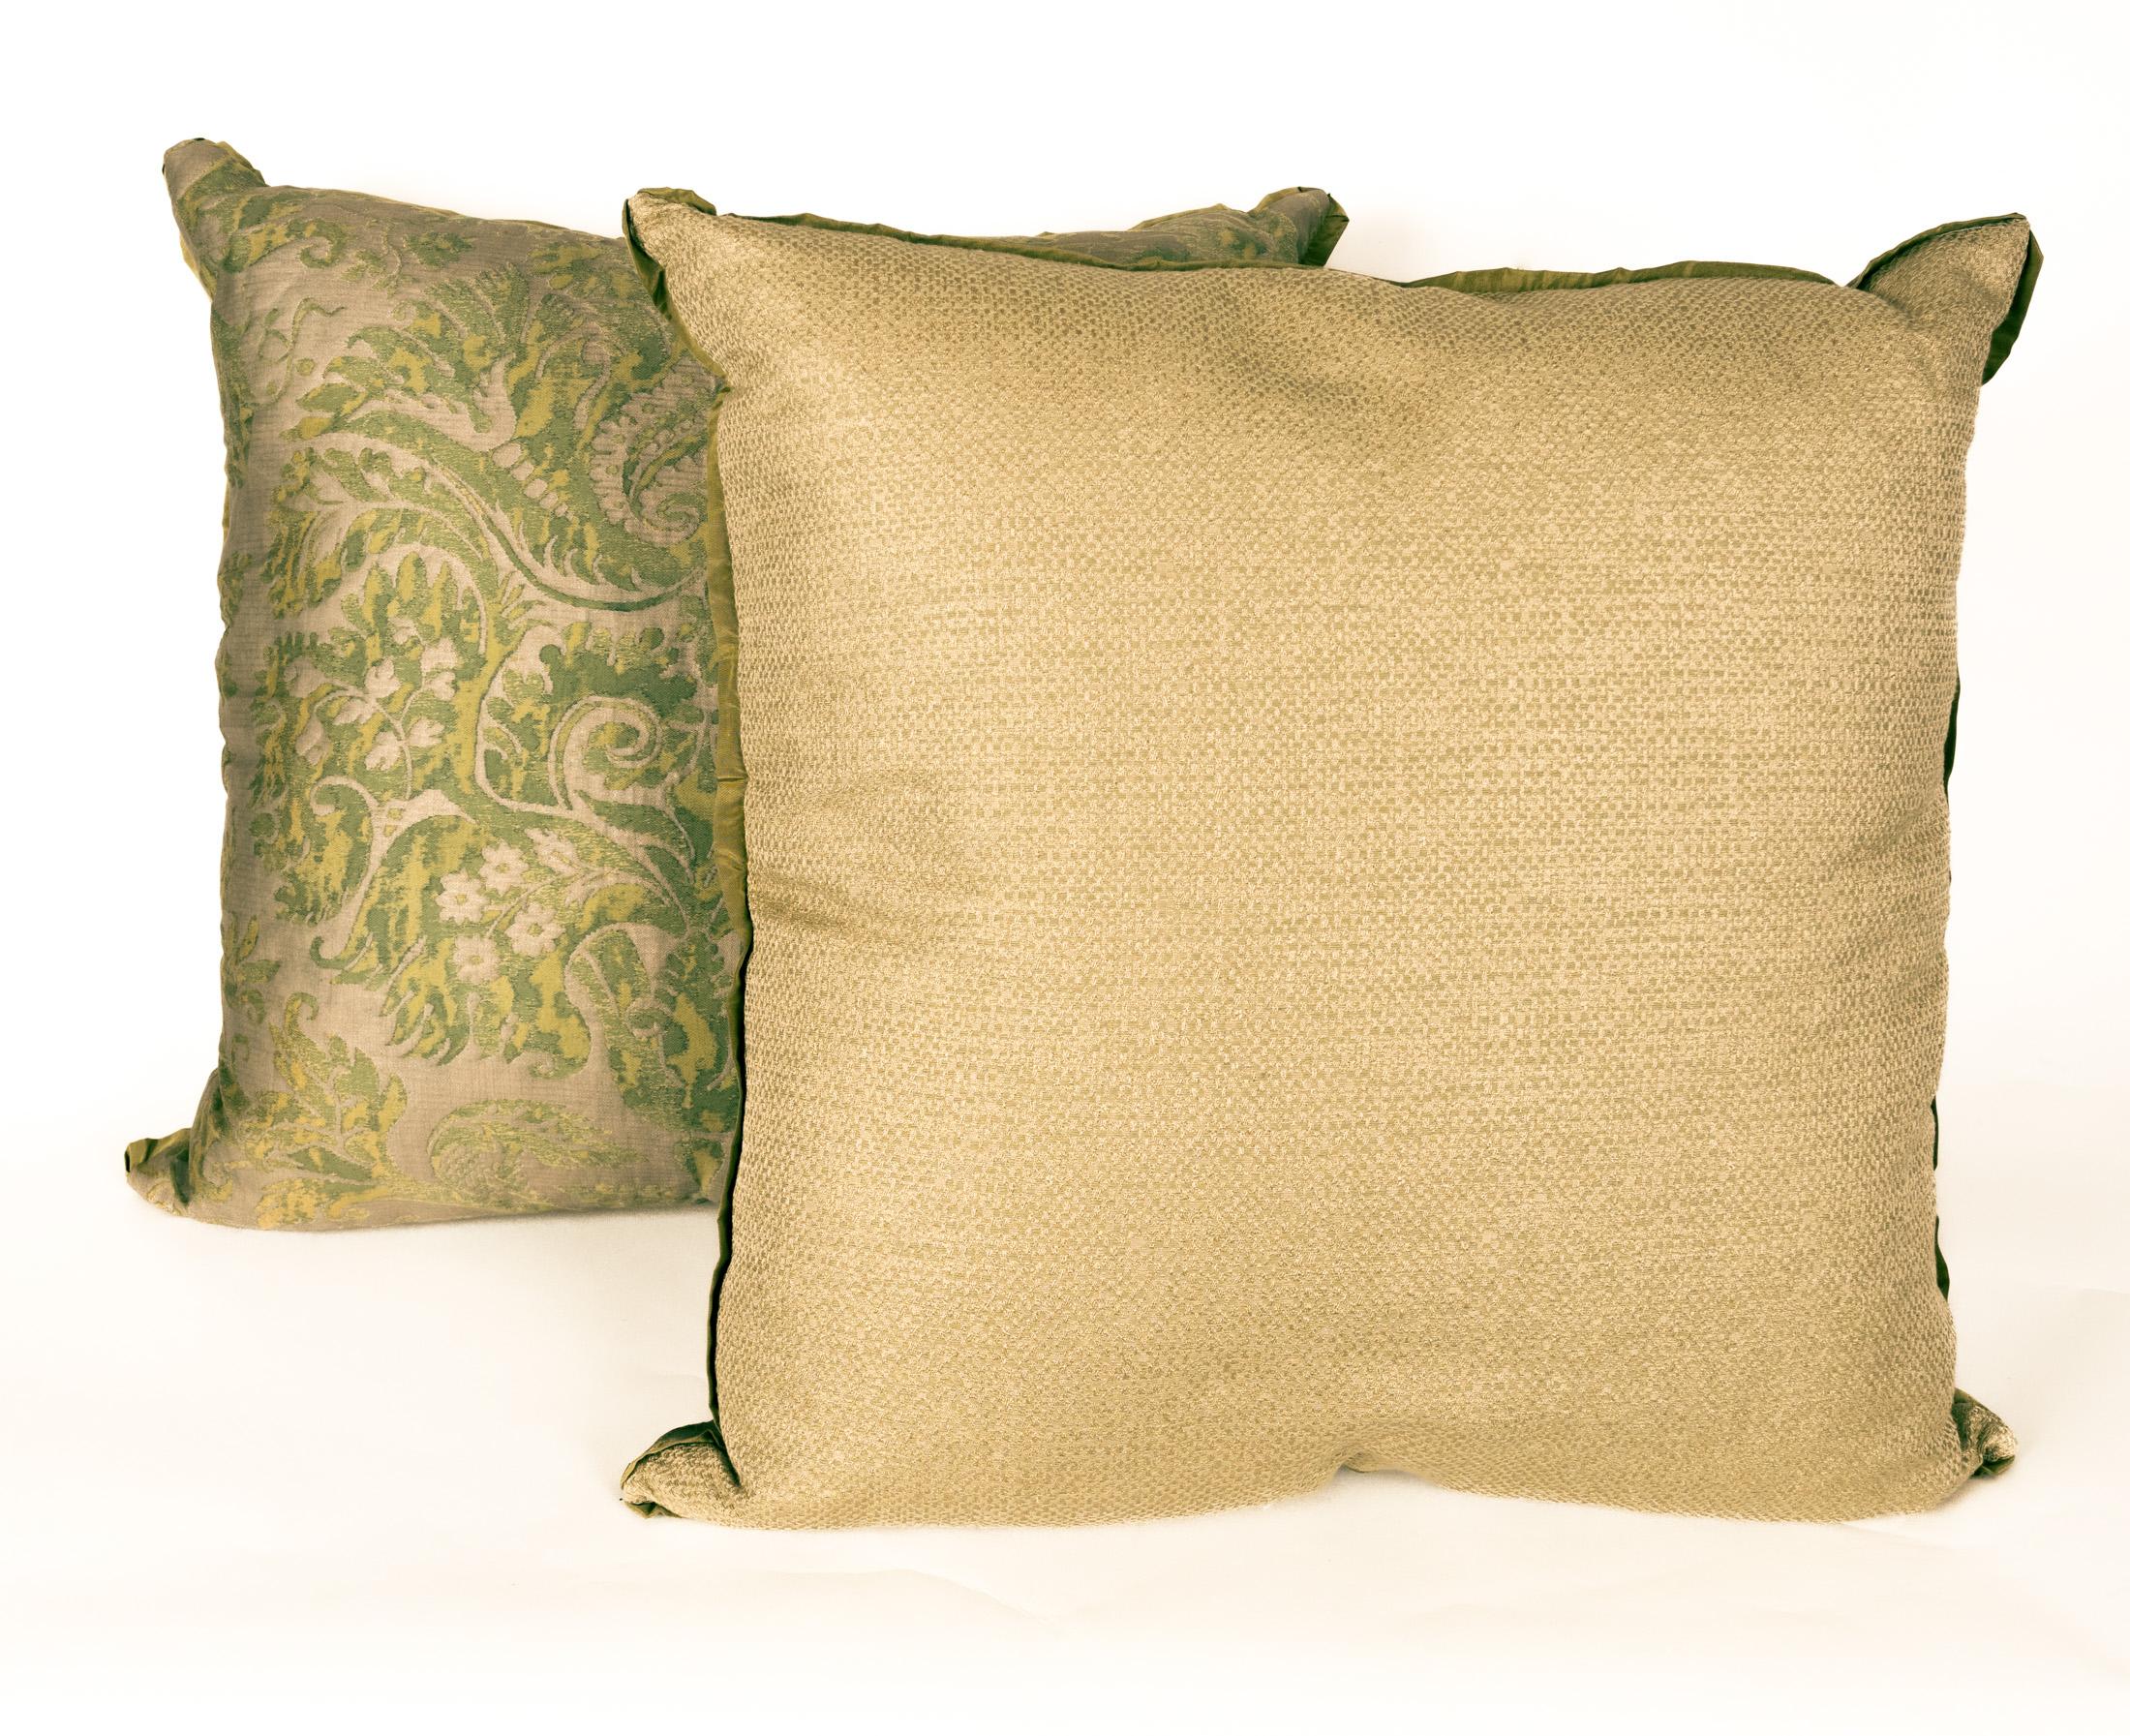 A pair of Fortuny fabric cushions in the DeMedici pattern, green and silvery gold color way with silk bias edging and silk blend backing material, the pattern, a 17th century Italian design named for the famous Florentine family, the Medici. Newly